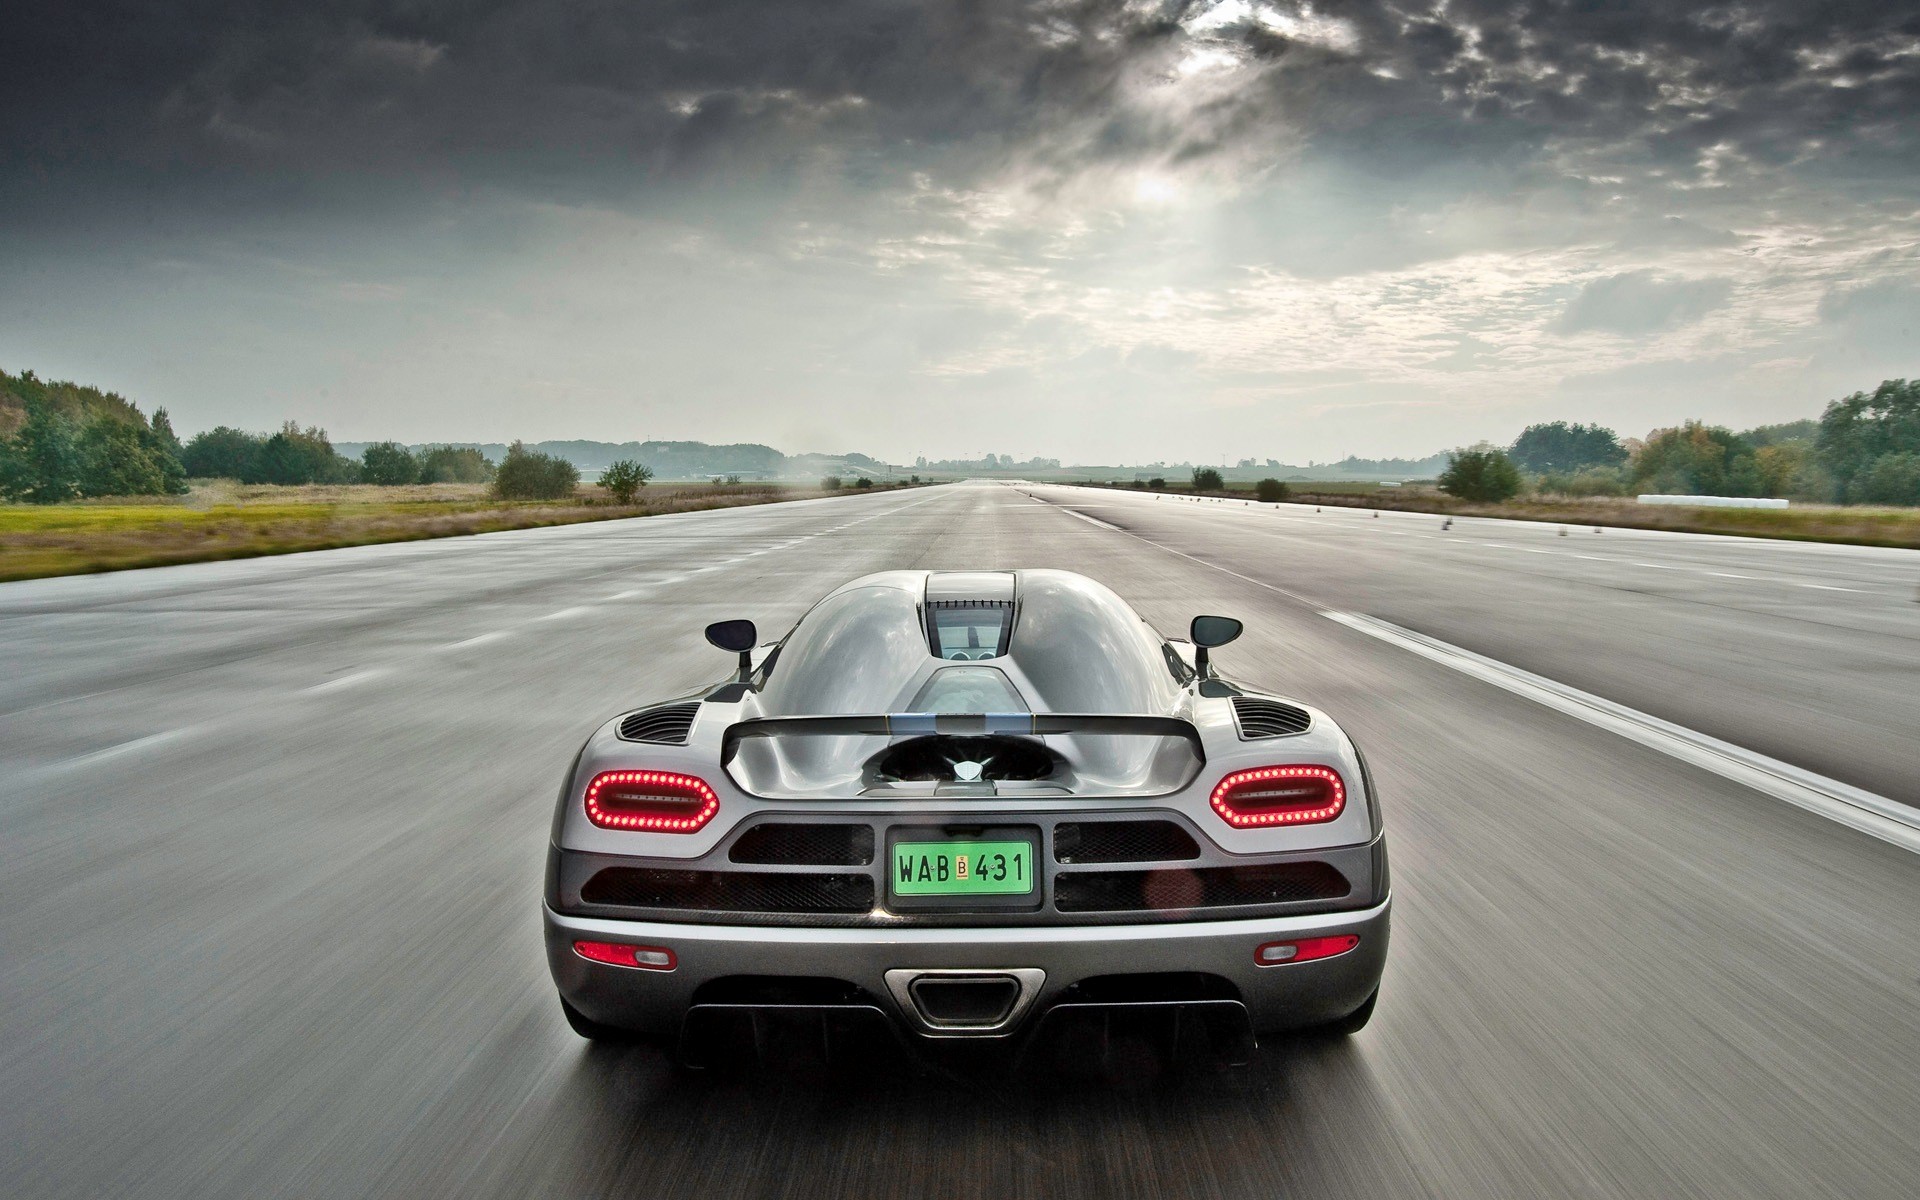 Free photo A Koenigsegg Agera during a speed test.